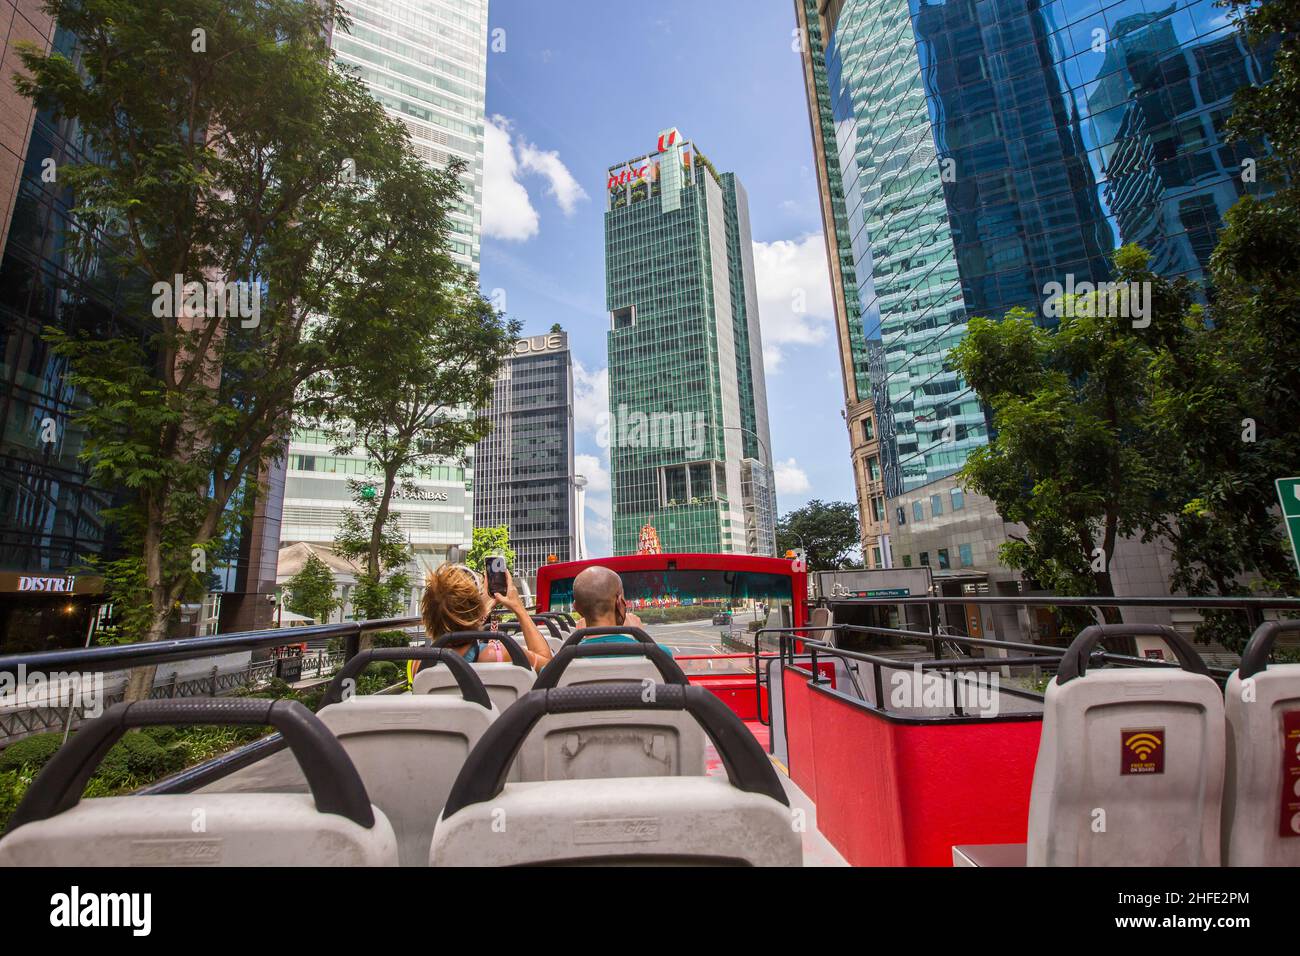 Tourists sitting on open top bus taking pictures of Singapore Central Business district commercial offices building. Stock Photo